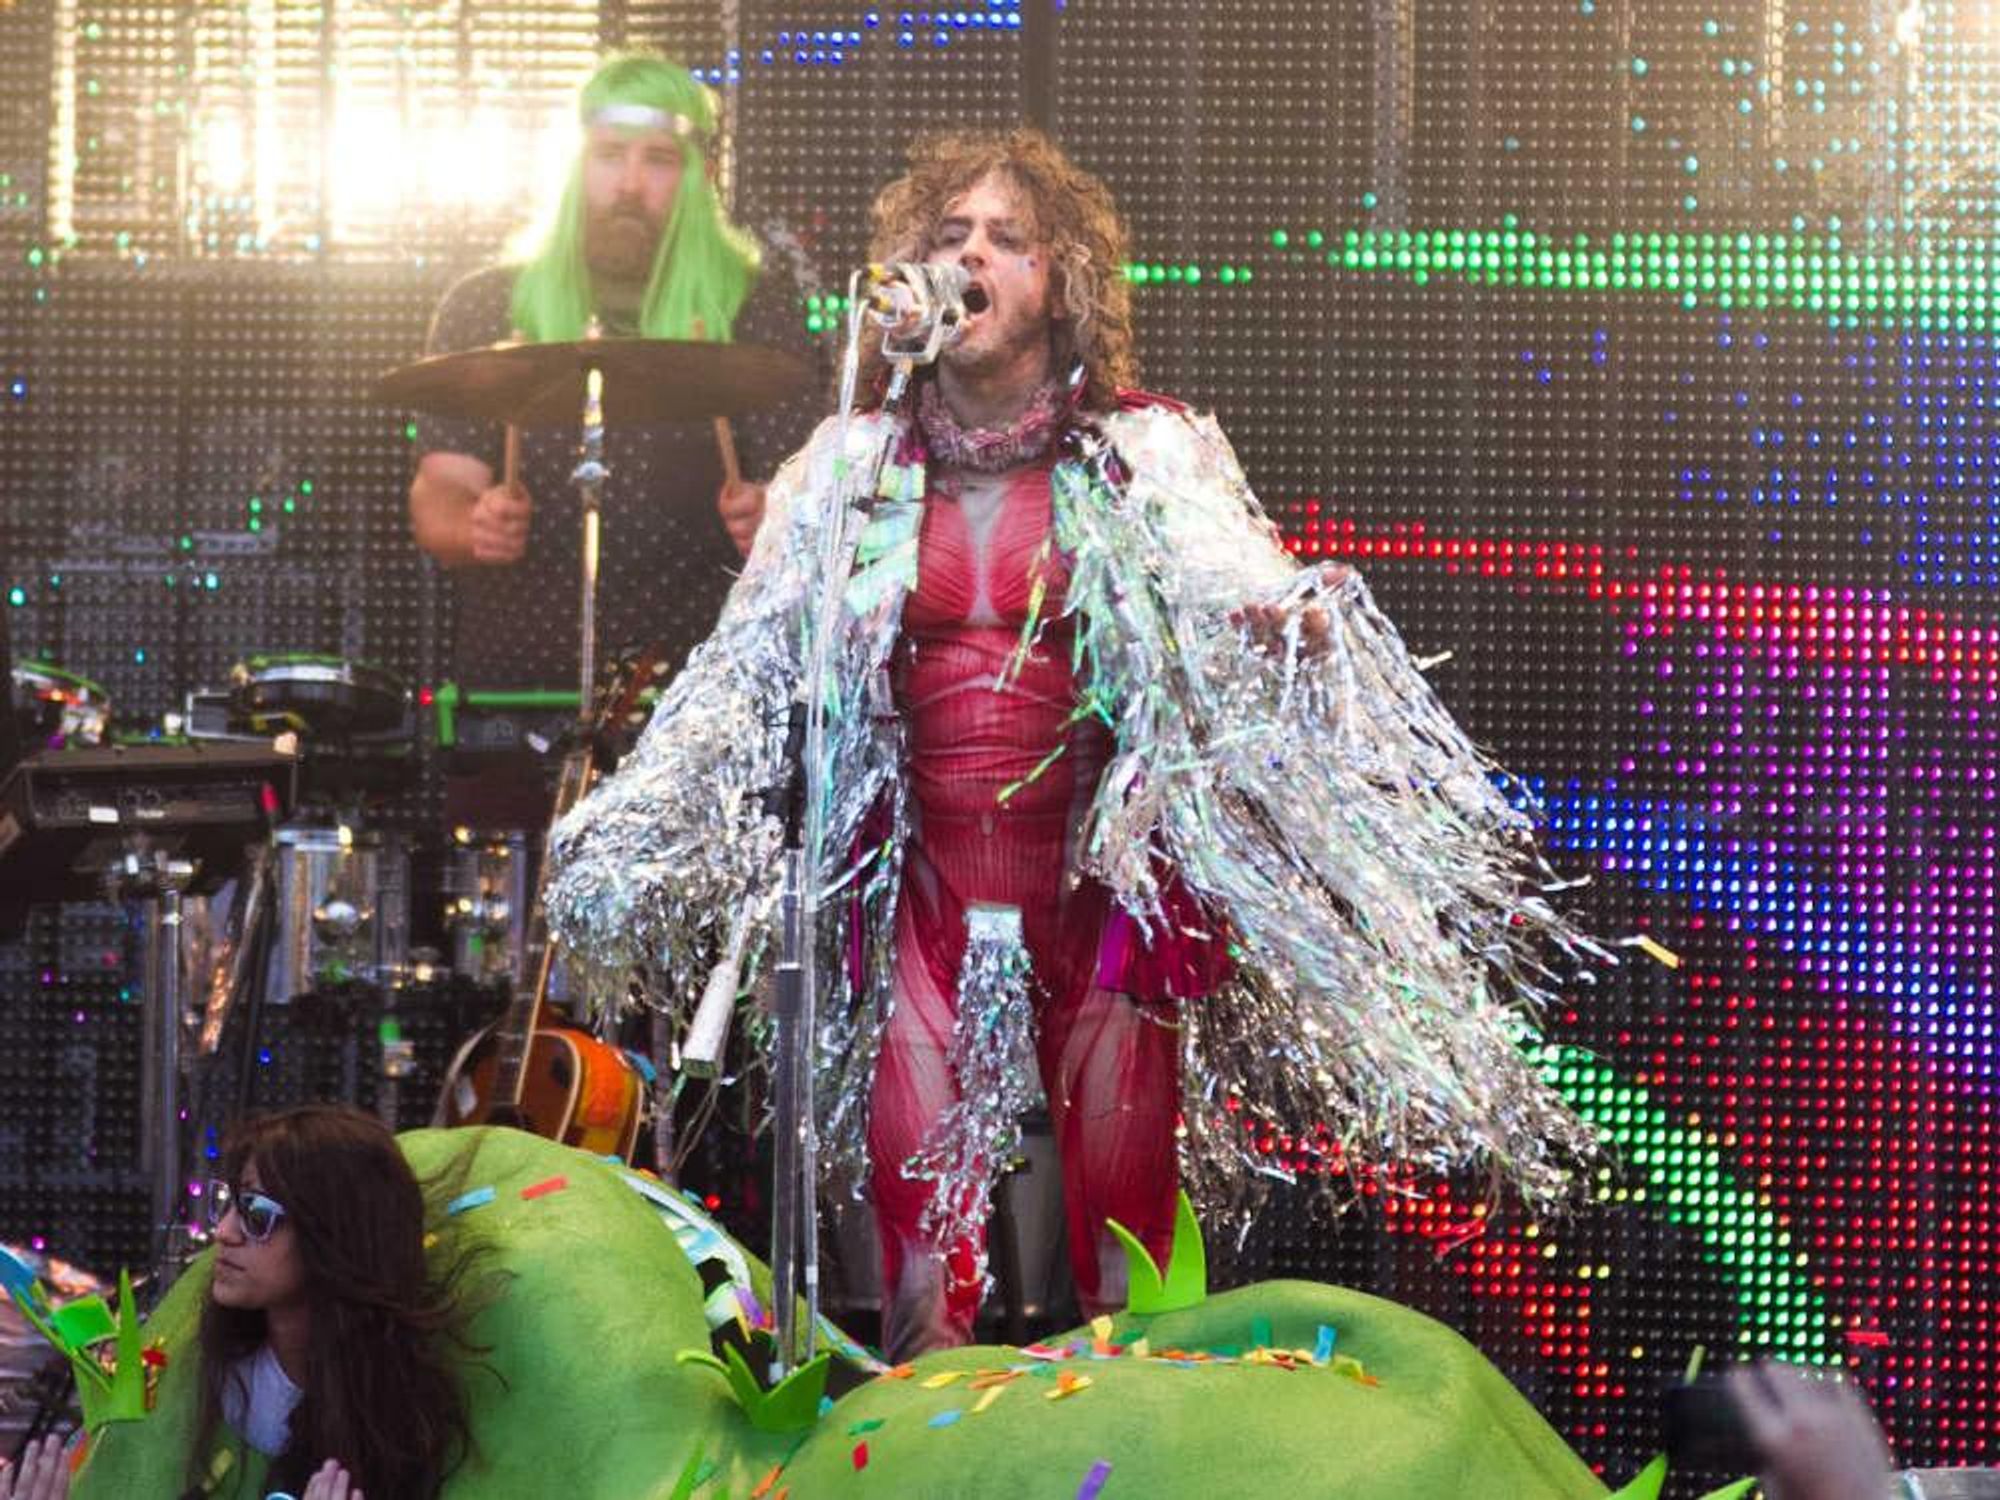 X-Games-Austin-Sunday-Flaming-Lips_123930_CROPPED